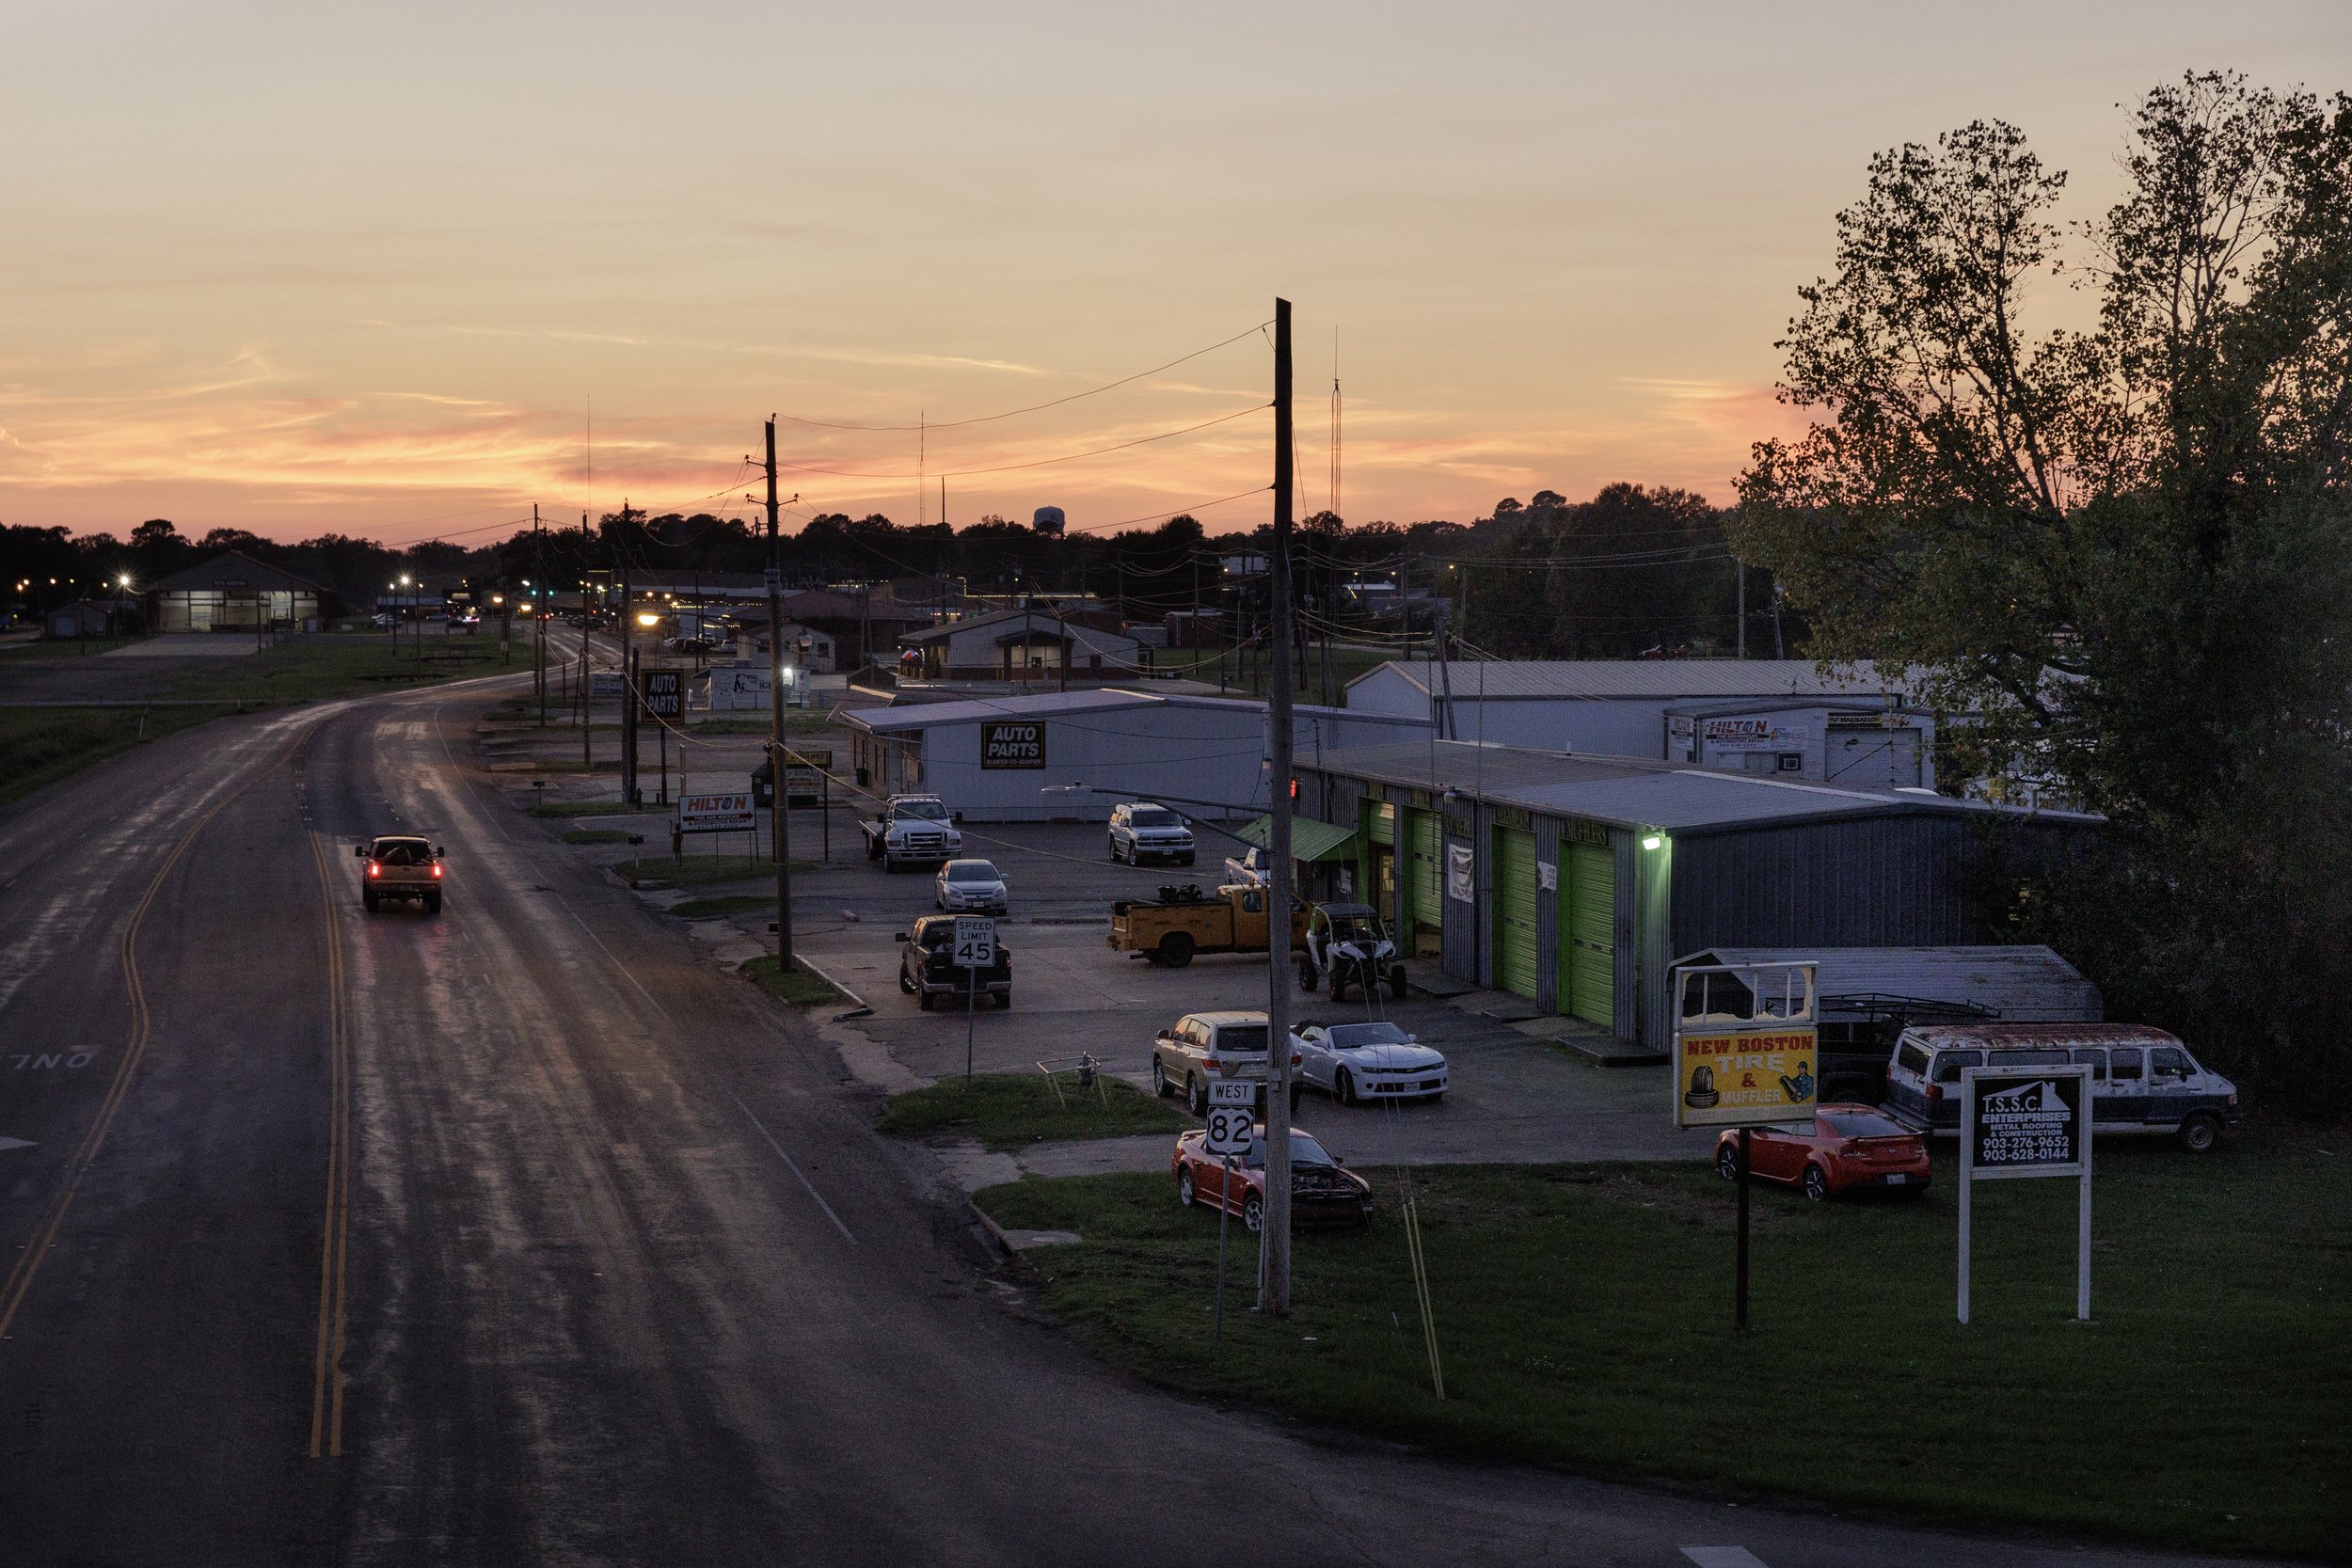  New Boston, TX at sunset. Over the next few months, Miranda would learn how difficult it is to carry a high-risk pregnancy in rural Texas. New Boston was 30 minutes from the nearest hospital, and three hours from the specialists she needed.  